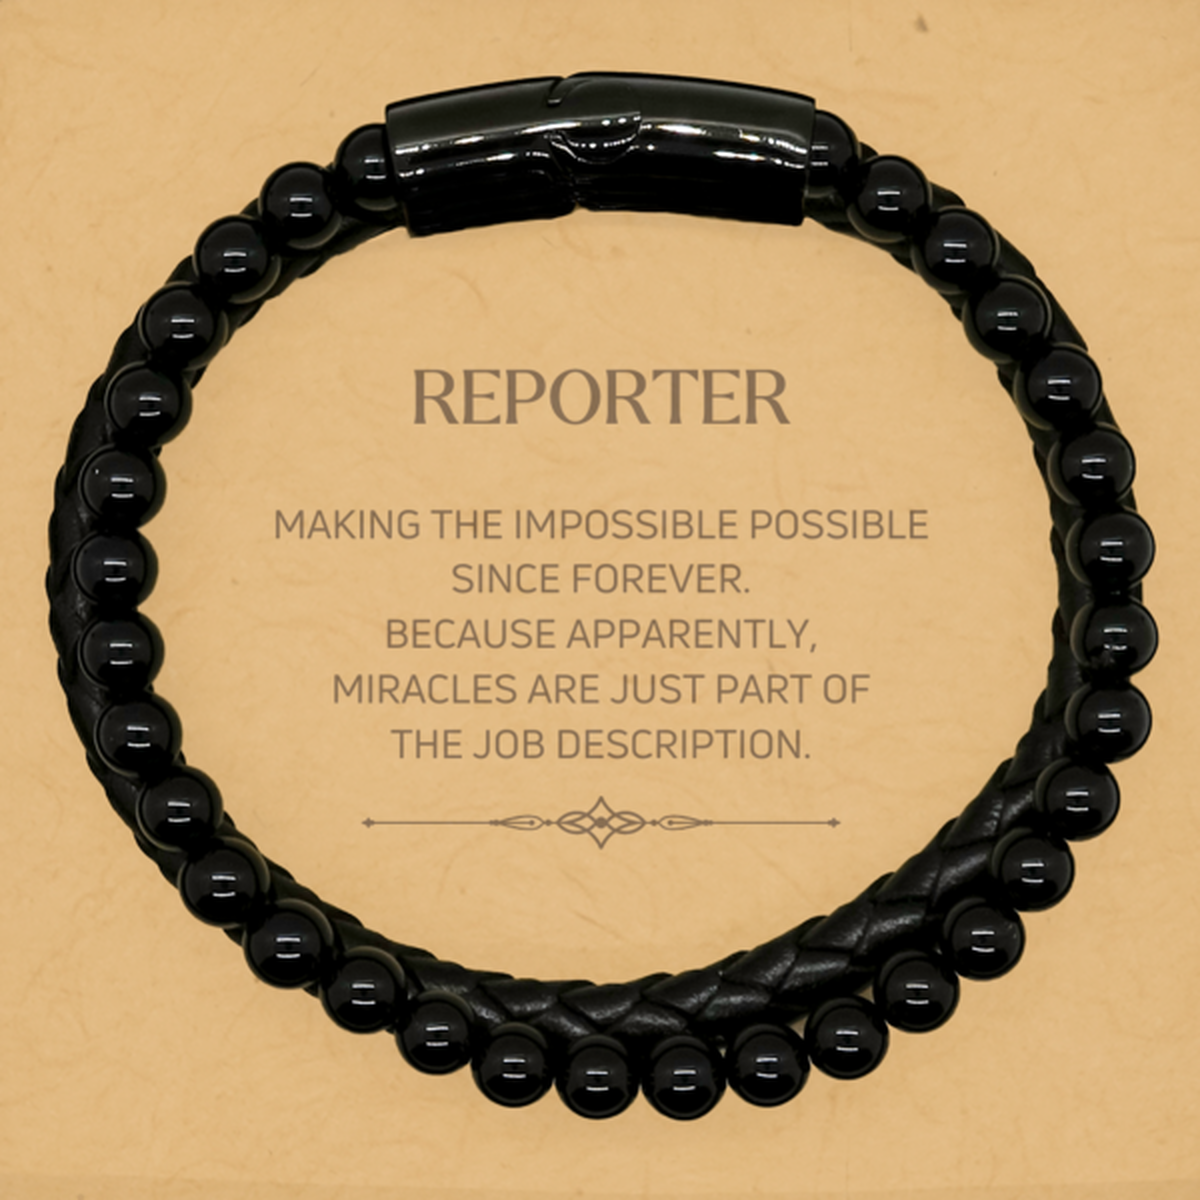 Funny Reporter Gifts, Miracles are just part of the job description, Inspirational Birthday Stone Leather Bracelets For Reporter, Men, Women, Coworkers, Friends, Boss